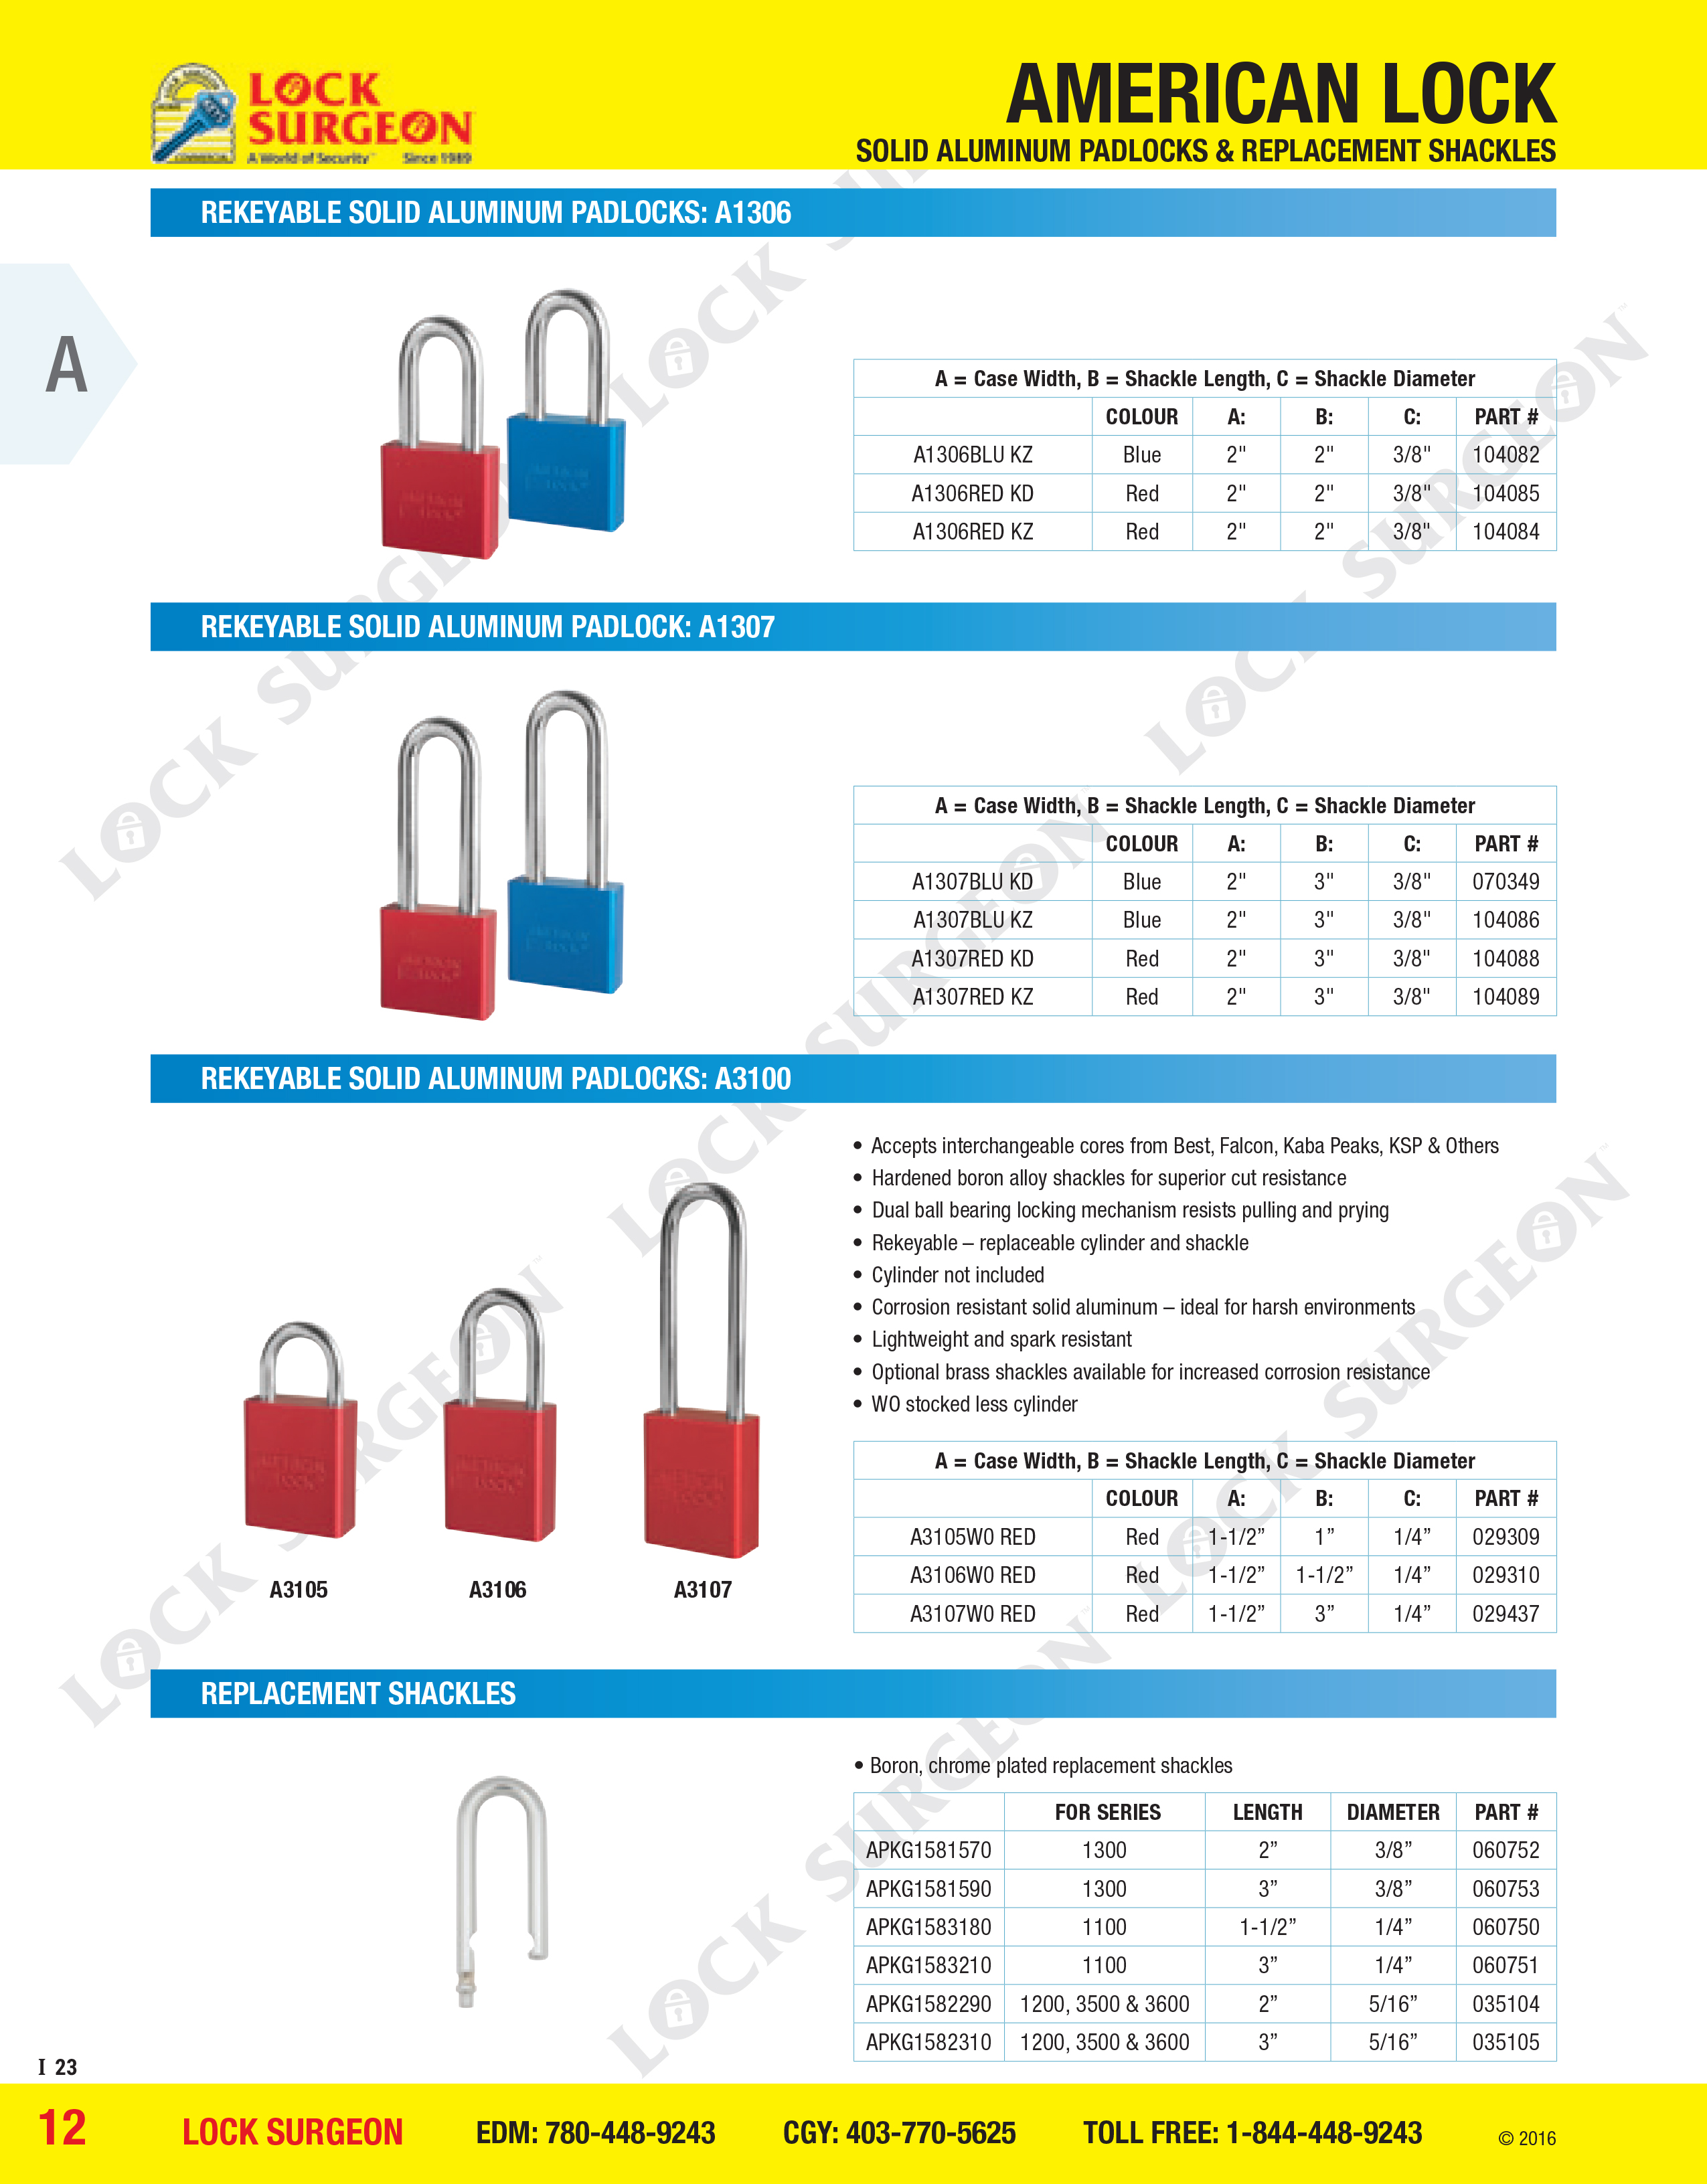 Rekeyable solid aluminium padlocks A1306, A1307, A3100 series and replacement shackles